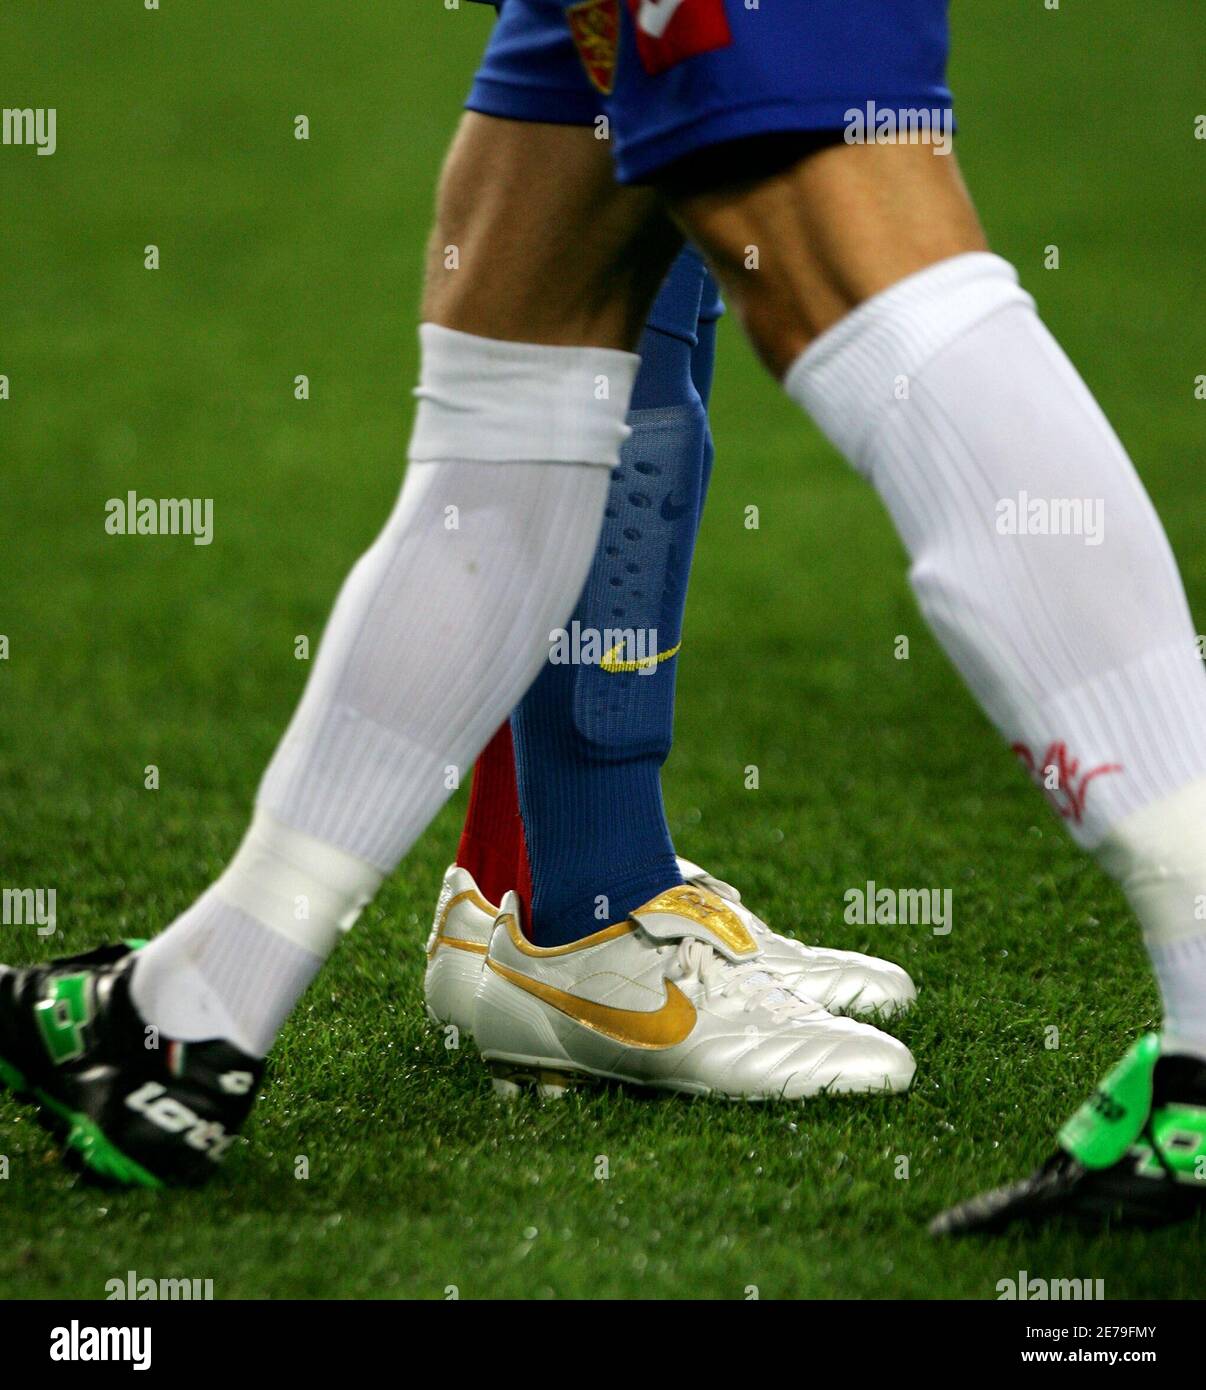 FC Barcelona's forward Brazilian Ronaldo de Assis 'Ronaldinho' wears a new  pair of soccer boots during his Spanish first division soccer match against  Real Zaragoza at Nou Camp stadium October 1, 2005.